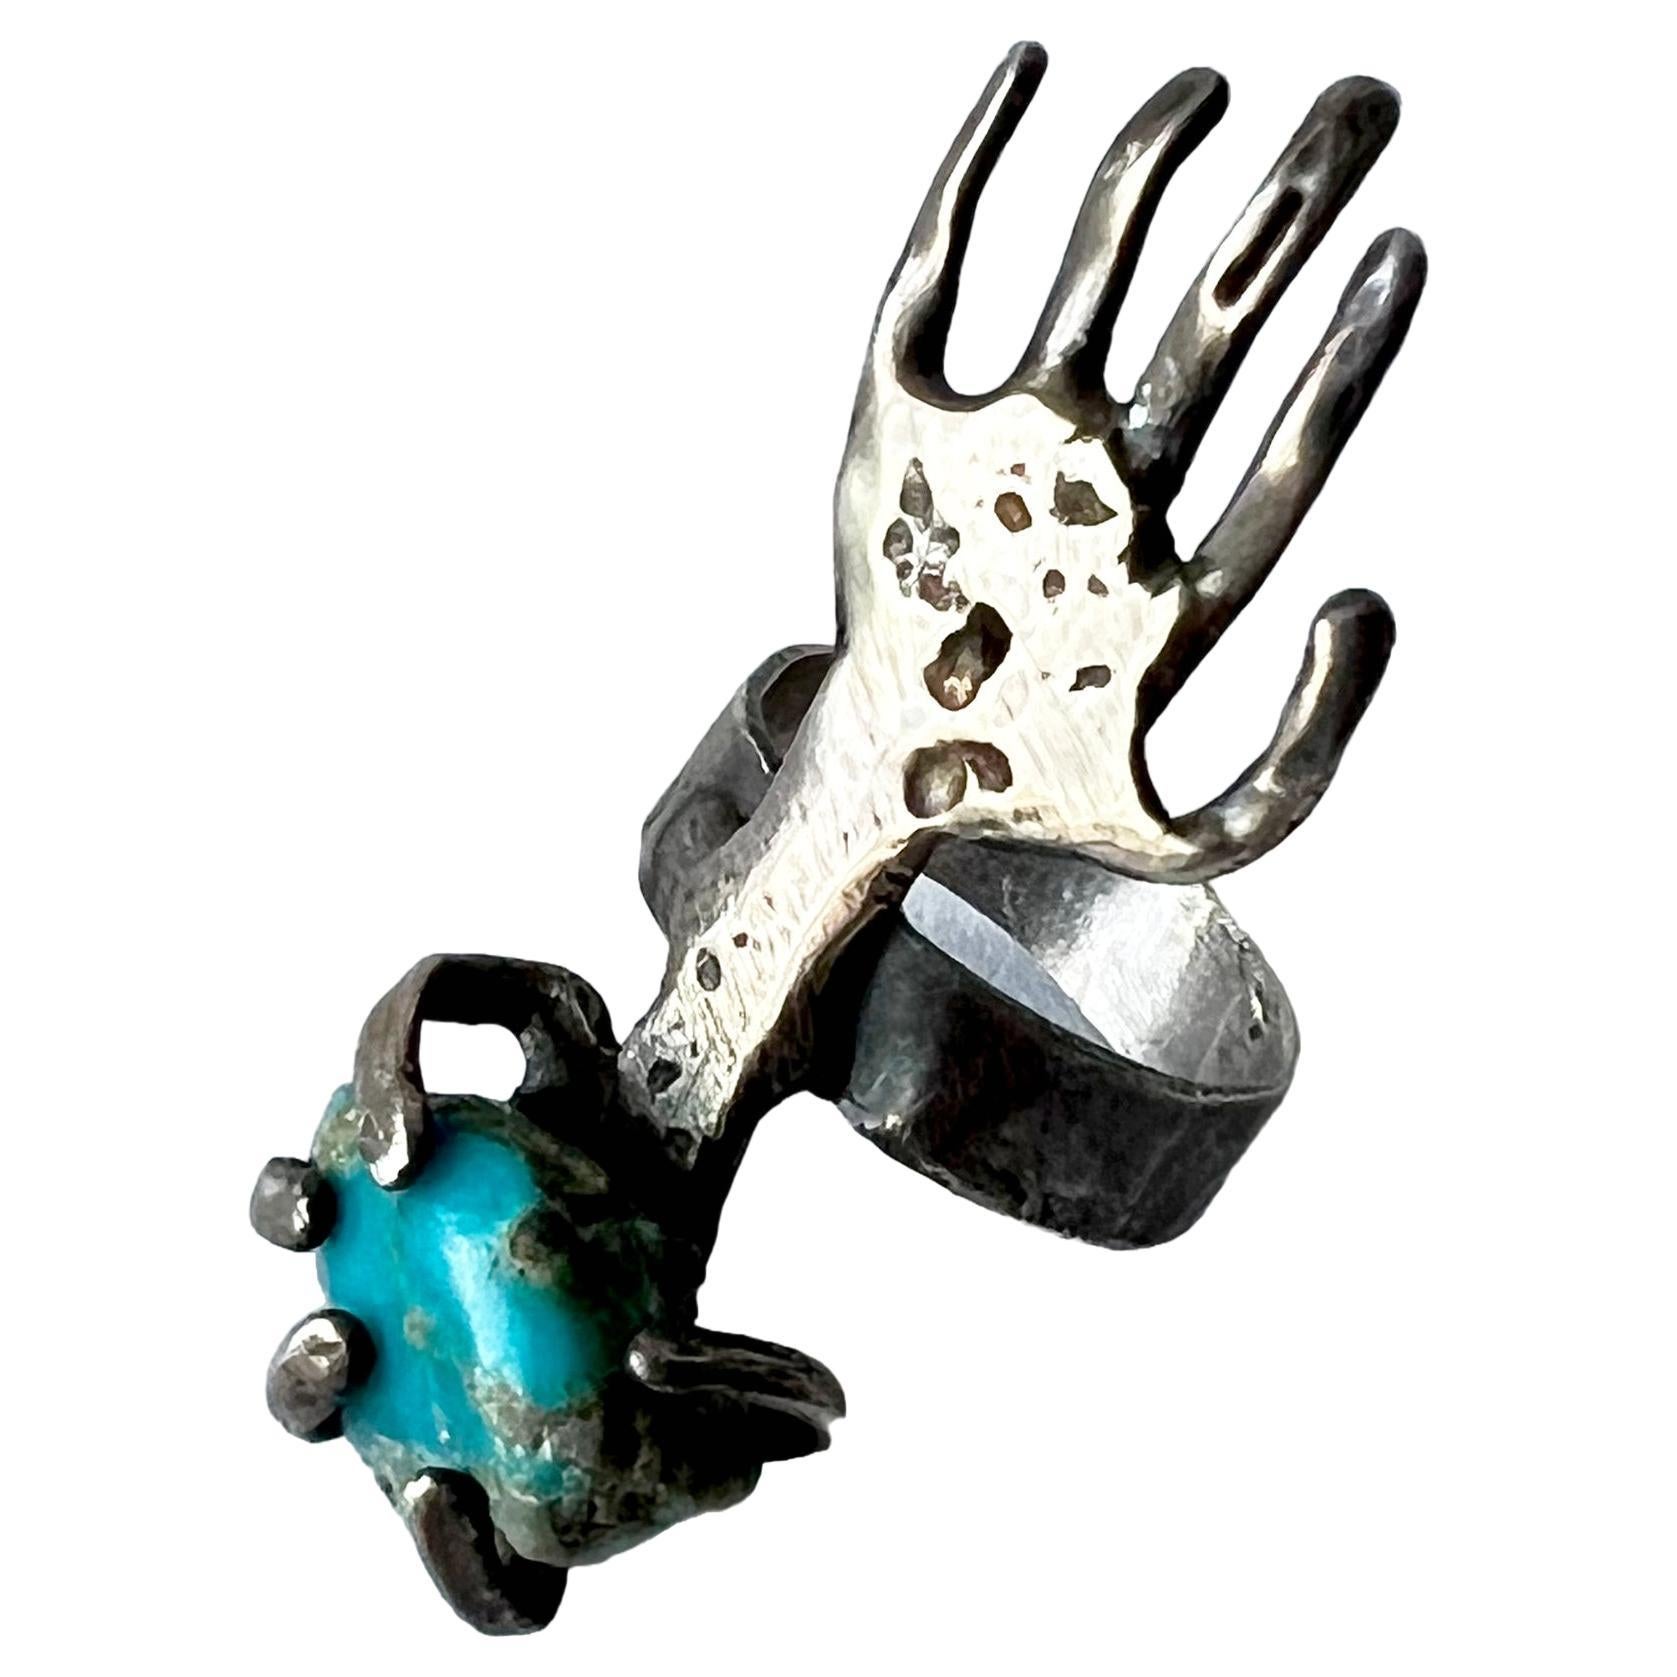 1960's surrealist silver hand ring with turquoise created by Pal Kepenyes of Acapulco, Mexico. Ring is a finger size 5 and could be resized by a competent jeweler if need be. In very good vintage 1960's condition. Unsigned.  